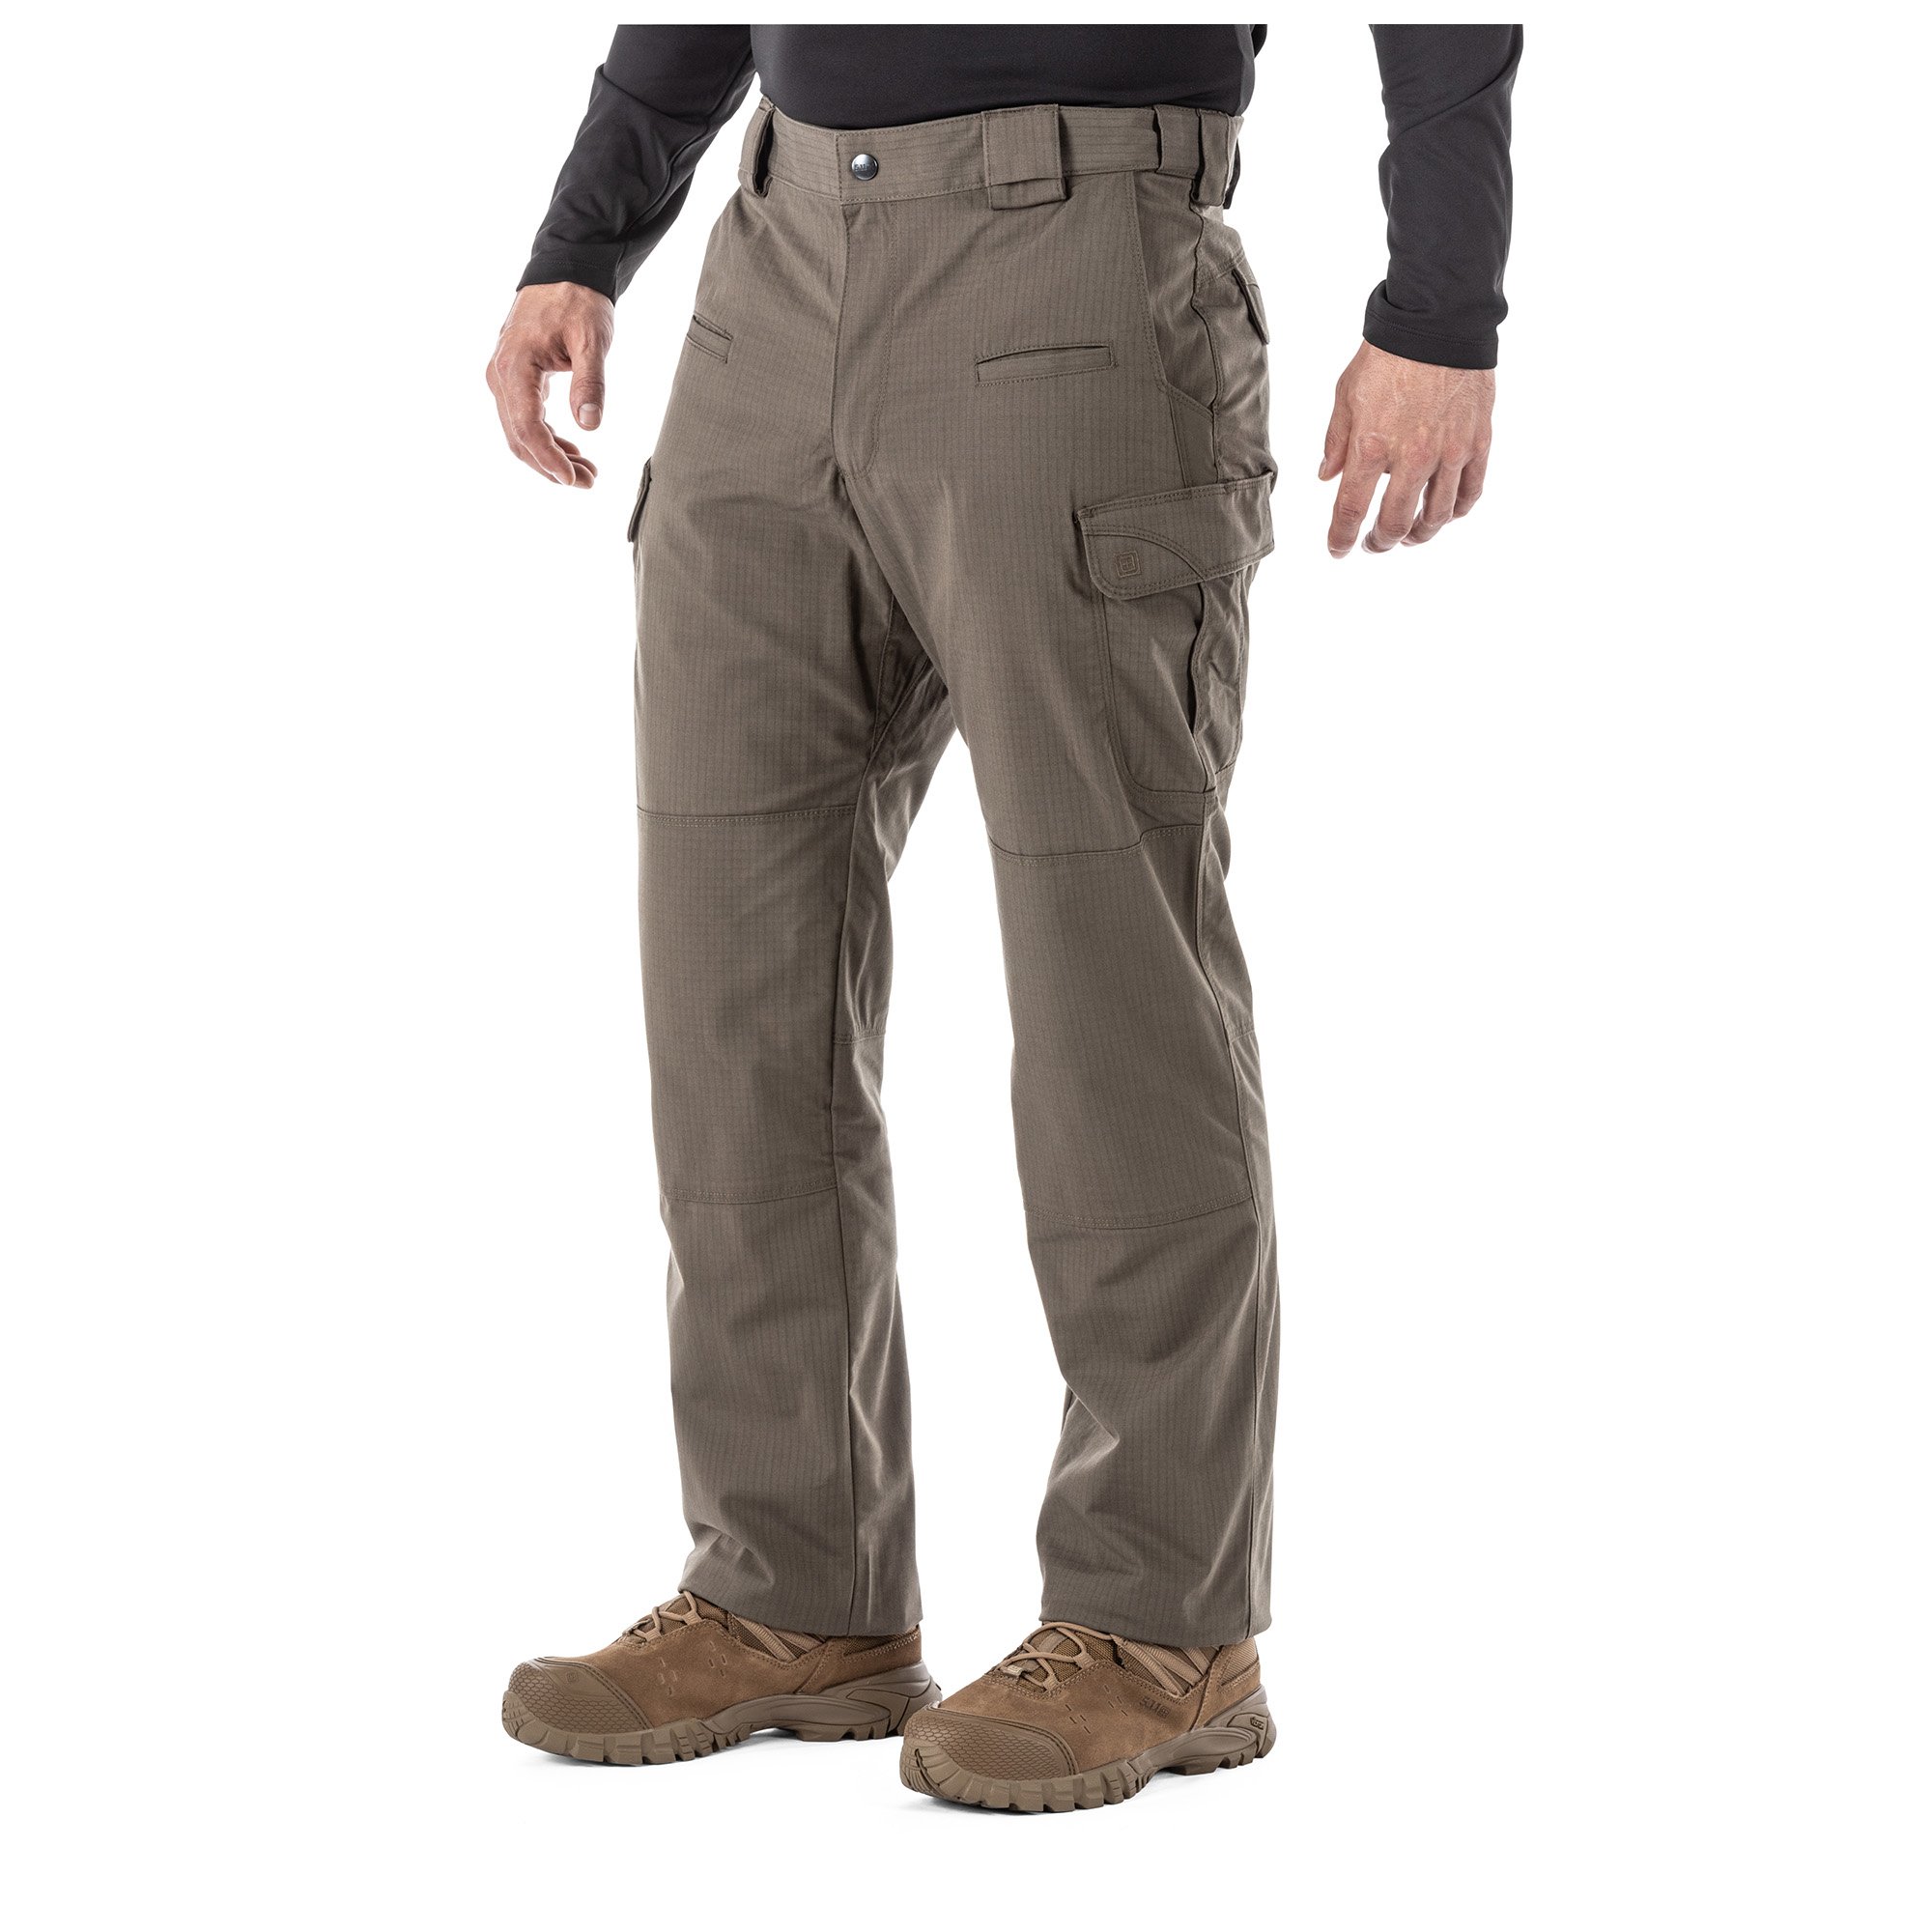 5.11 Work Gear Men's Stryke Pants, Adjustable Waistband, Stretchable Flex-Tac Fabric, Storm, 40W x 32L, Style 74369 - image 2 of 7